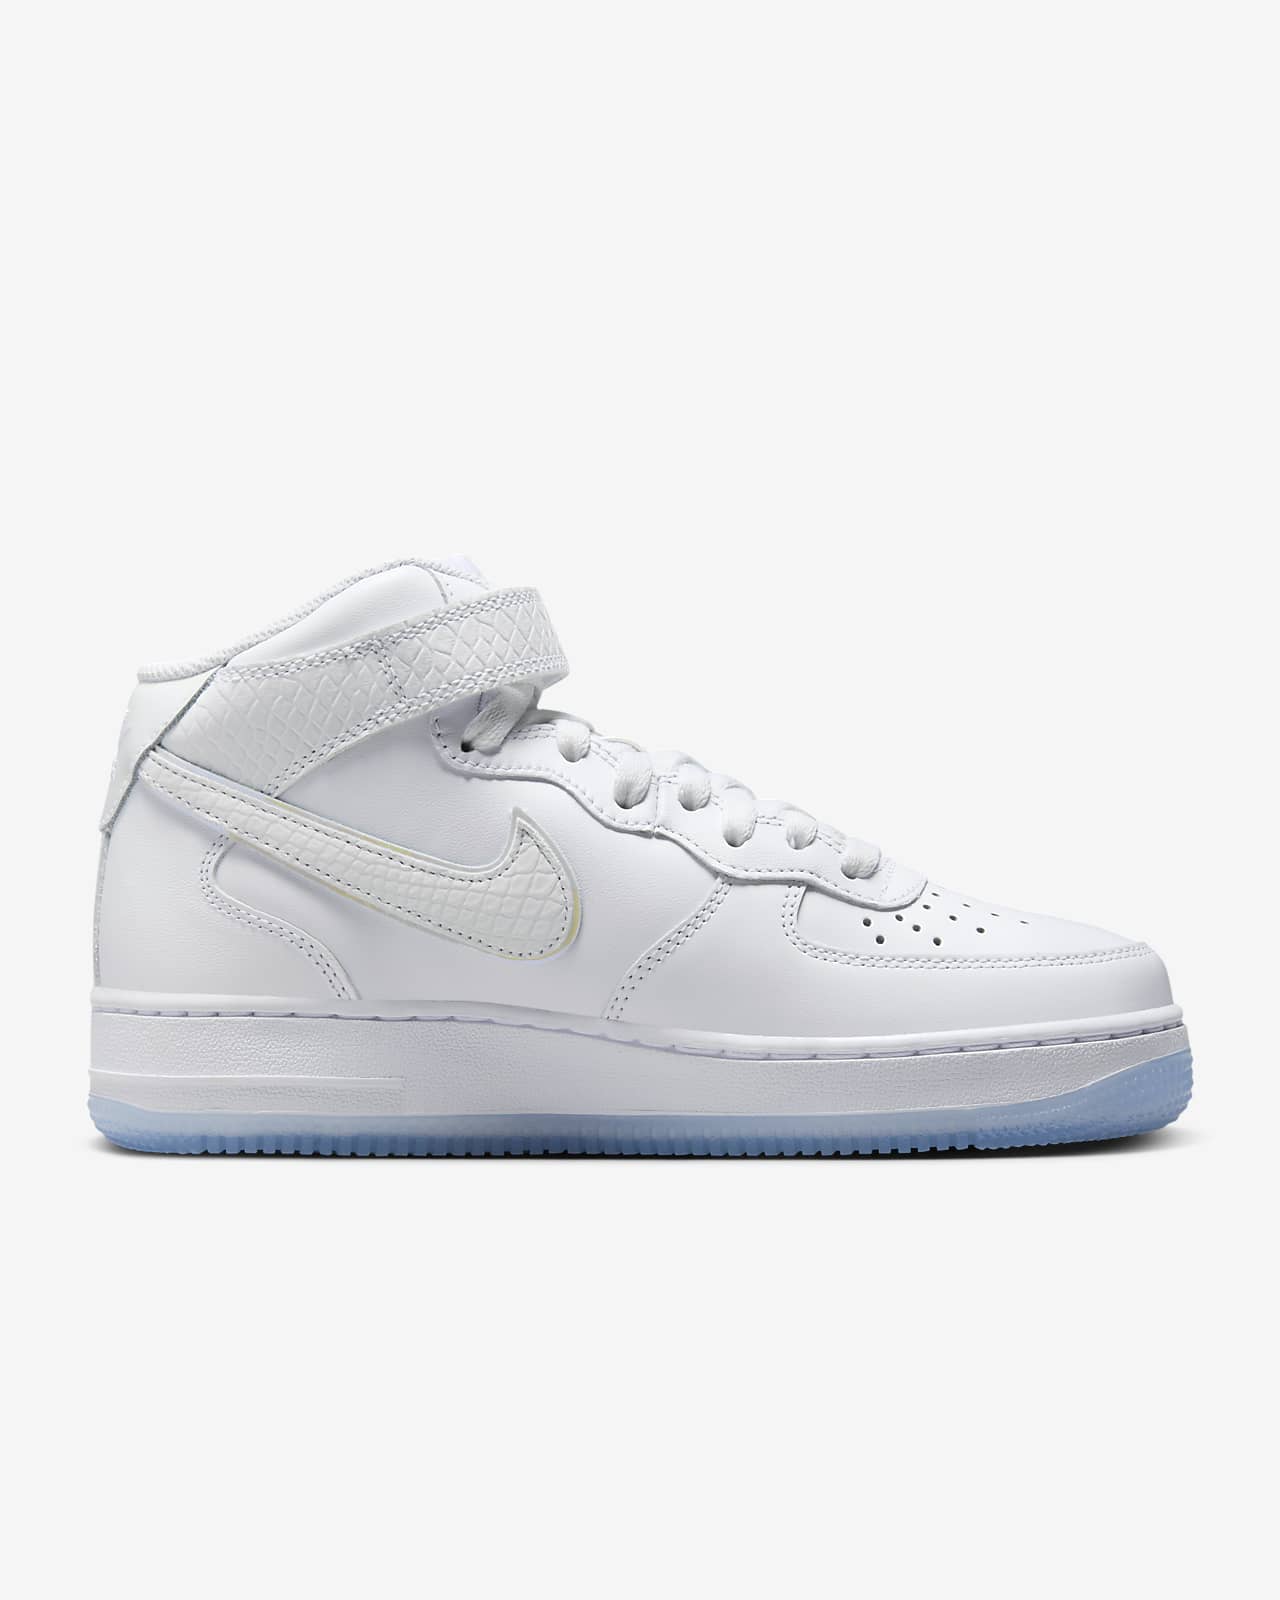 Nike Women's Air Force 1 Mid Shoes in White, Size: 7 | FN4274-100